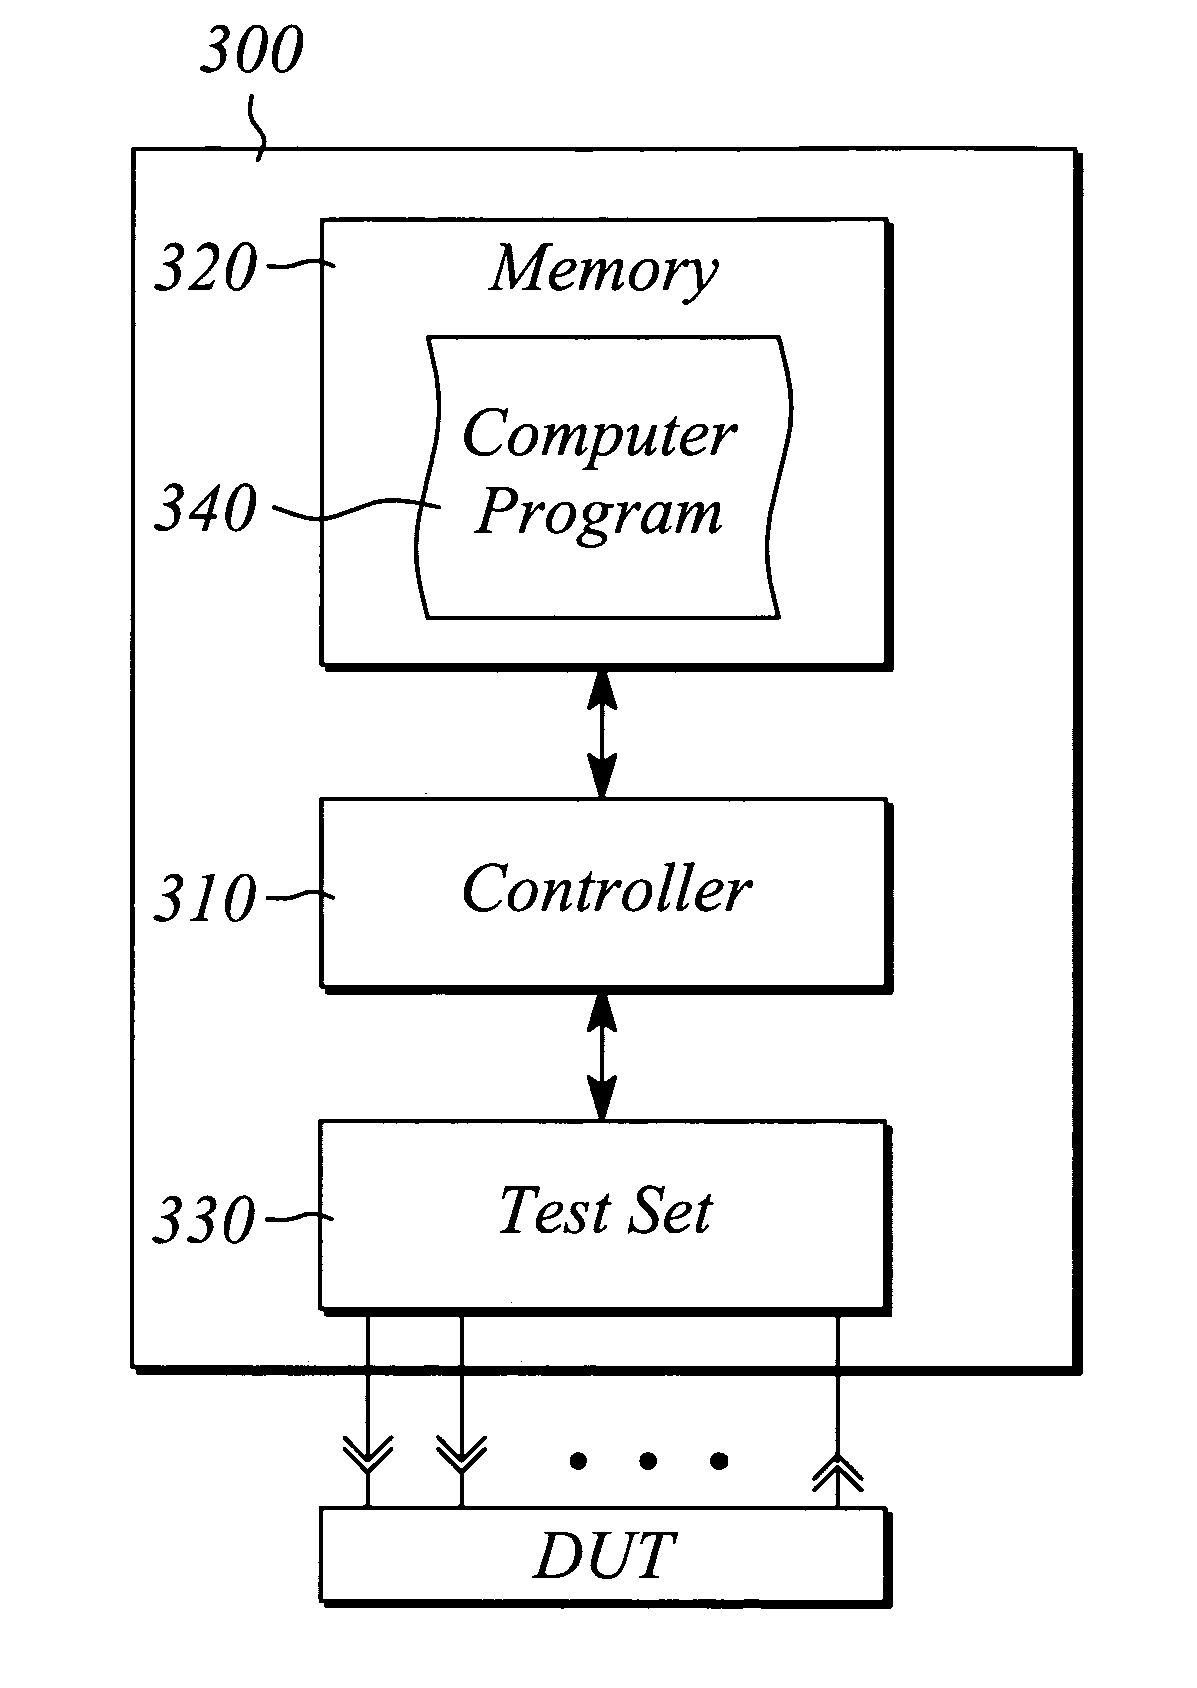 Multiport network analyzer calibration employing reciprocity of a device